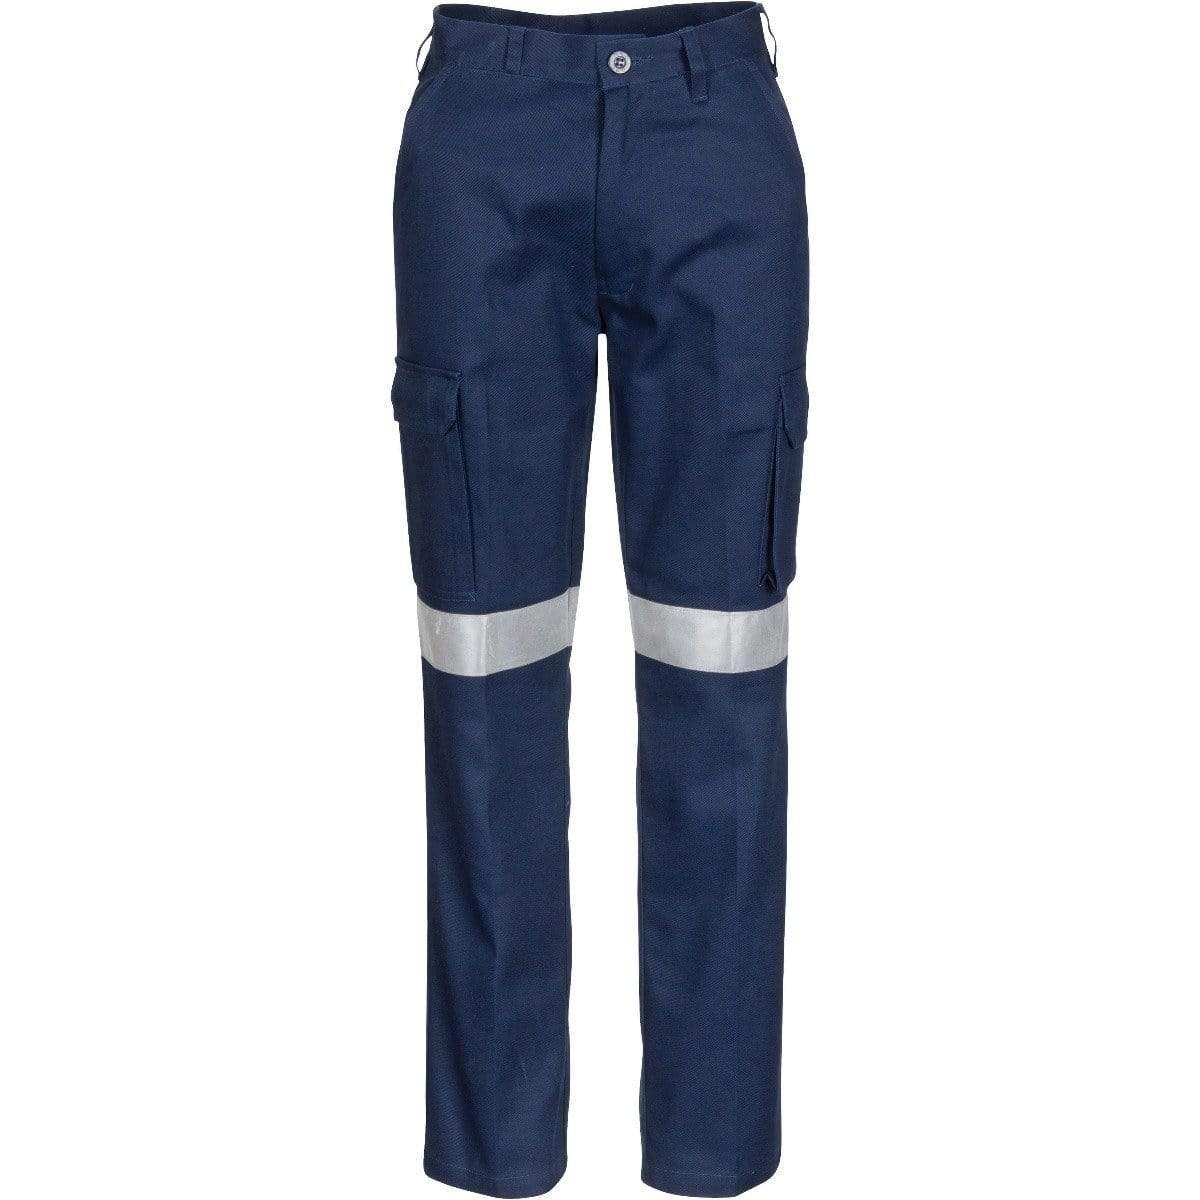 DNC Workwear Work Wear DNC WORKWEAR Ladies Cotton Drill Cargo Pants with 3M Reflective Tape 3323